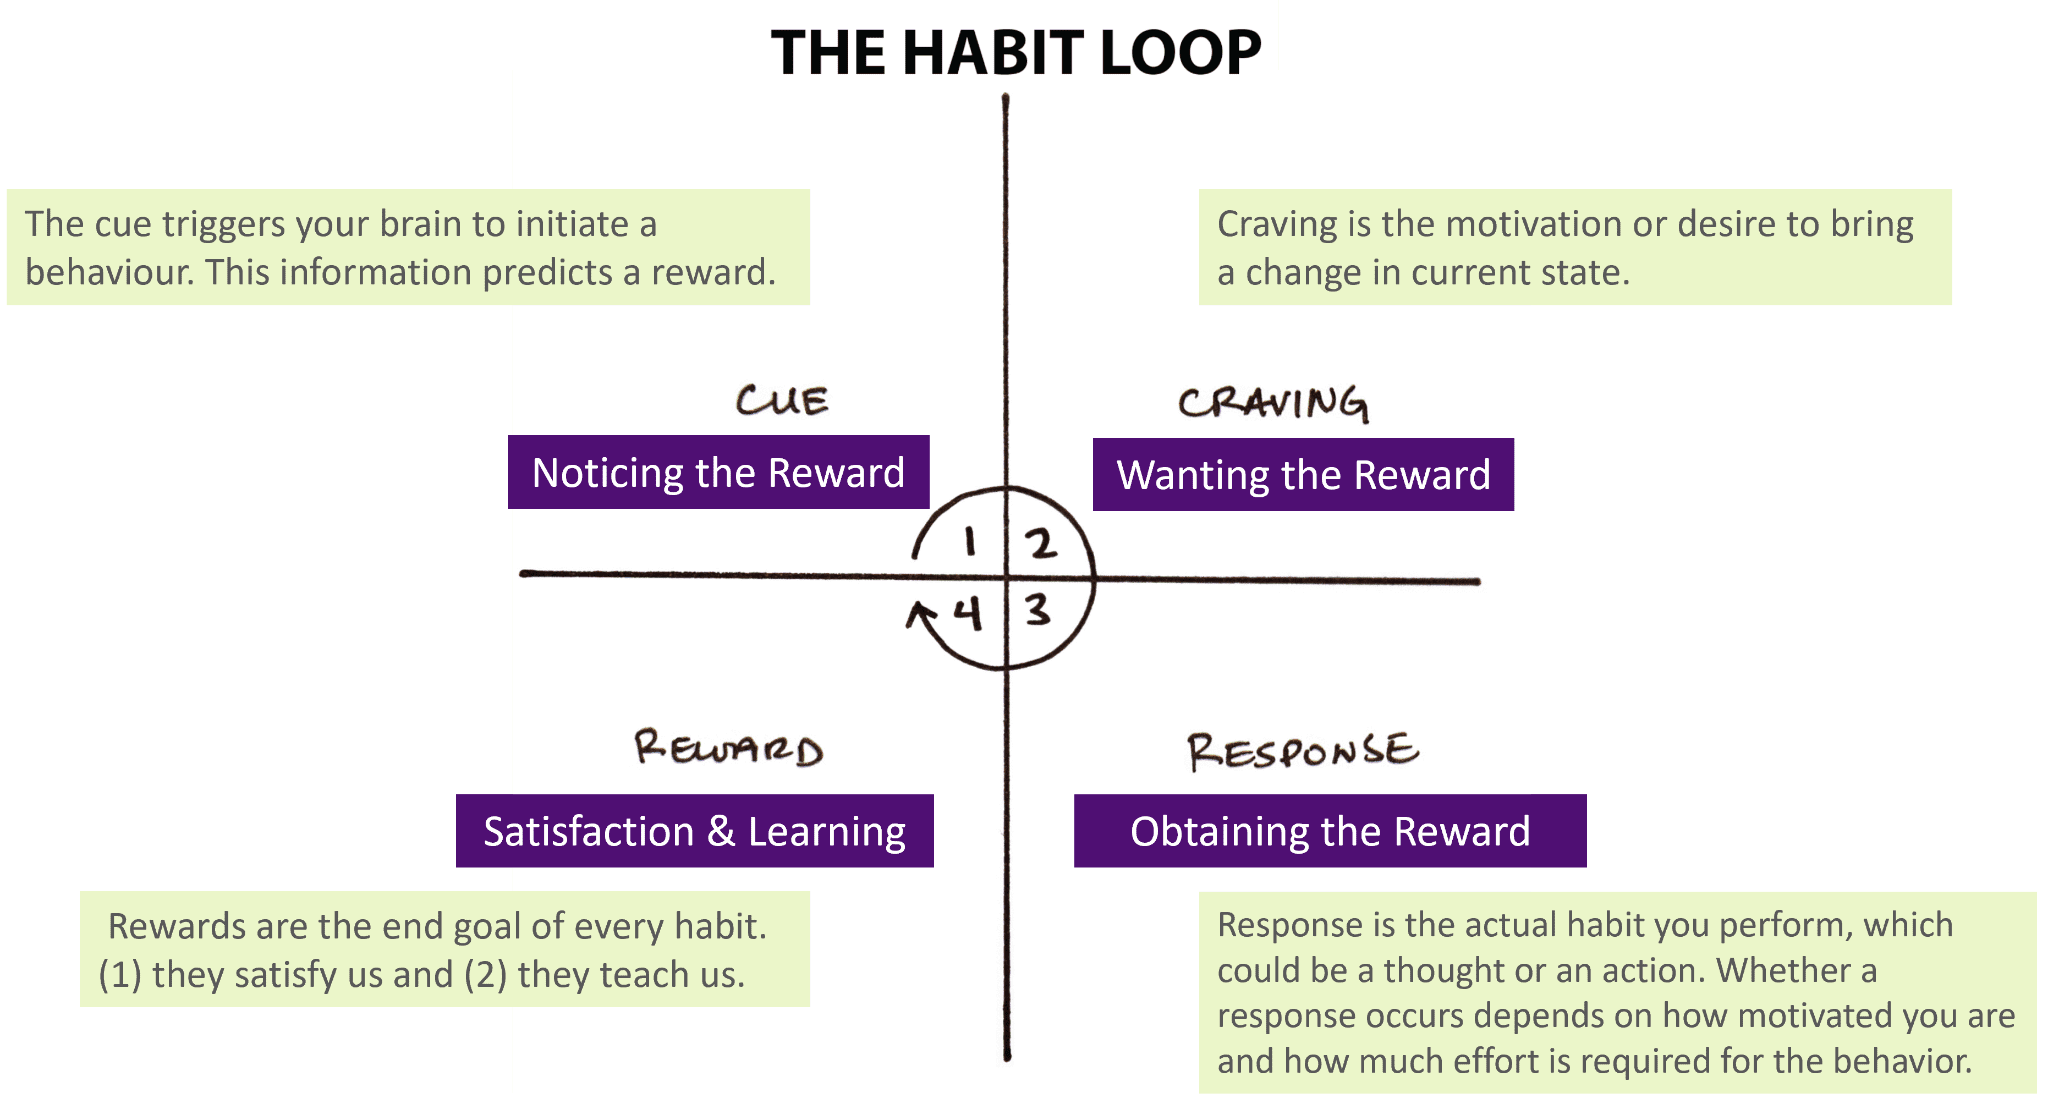 The habit loop showing four main laws of the cue, craving, response and reward in the process